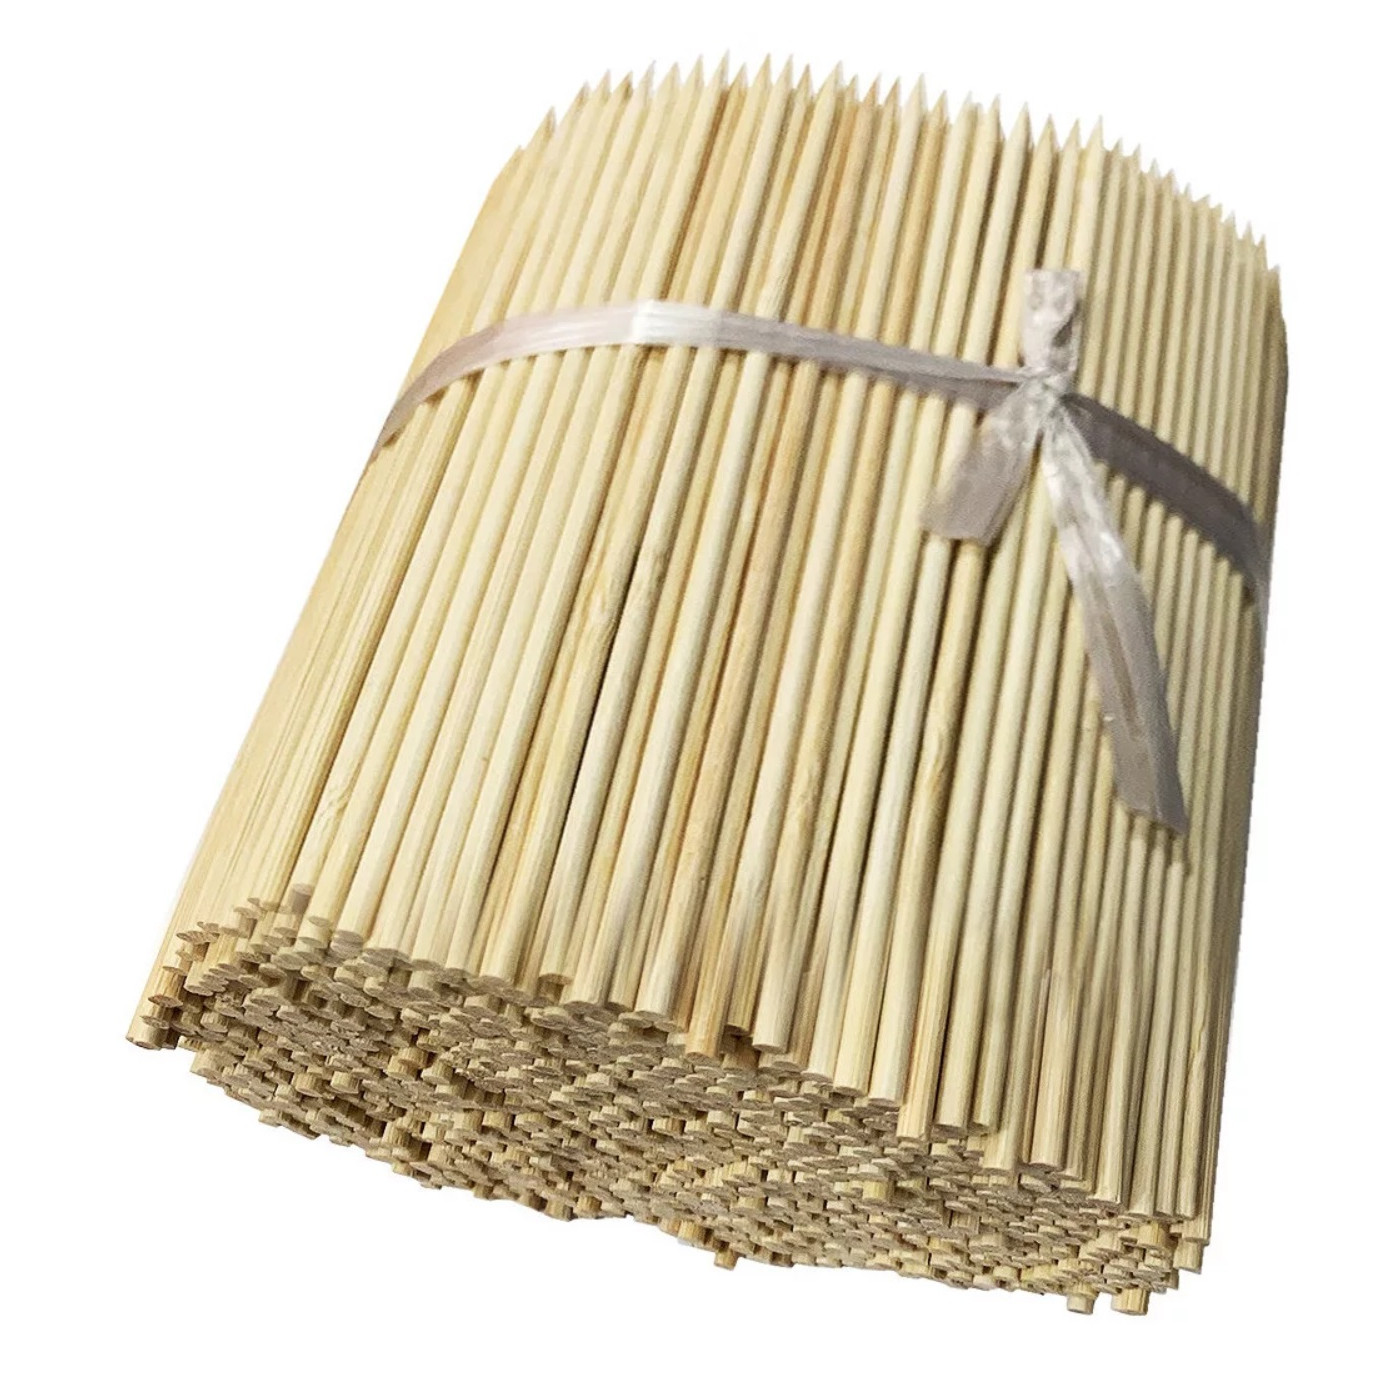 Set of 1000 short bamboo sticks (2.5 mm x 15 cm, pointed on one